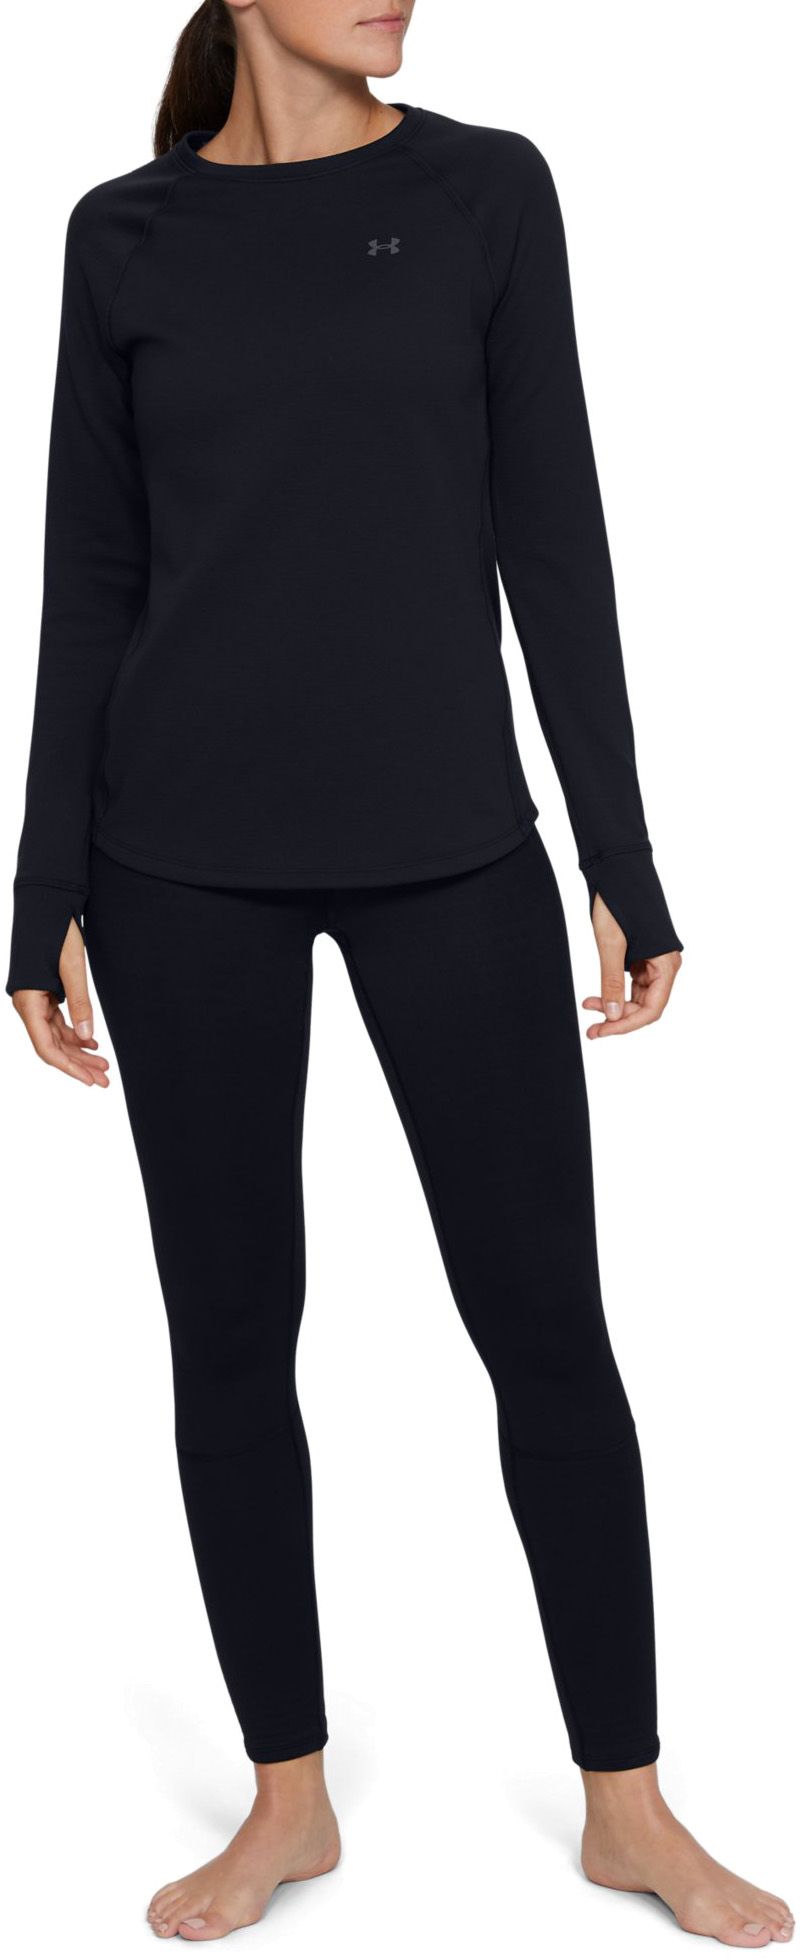 Dick's Sporting Goods Under Armour Women's Base 4.0 Long Sleeve Baselayer